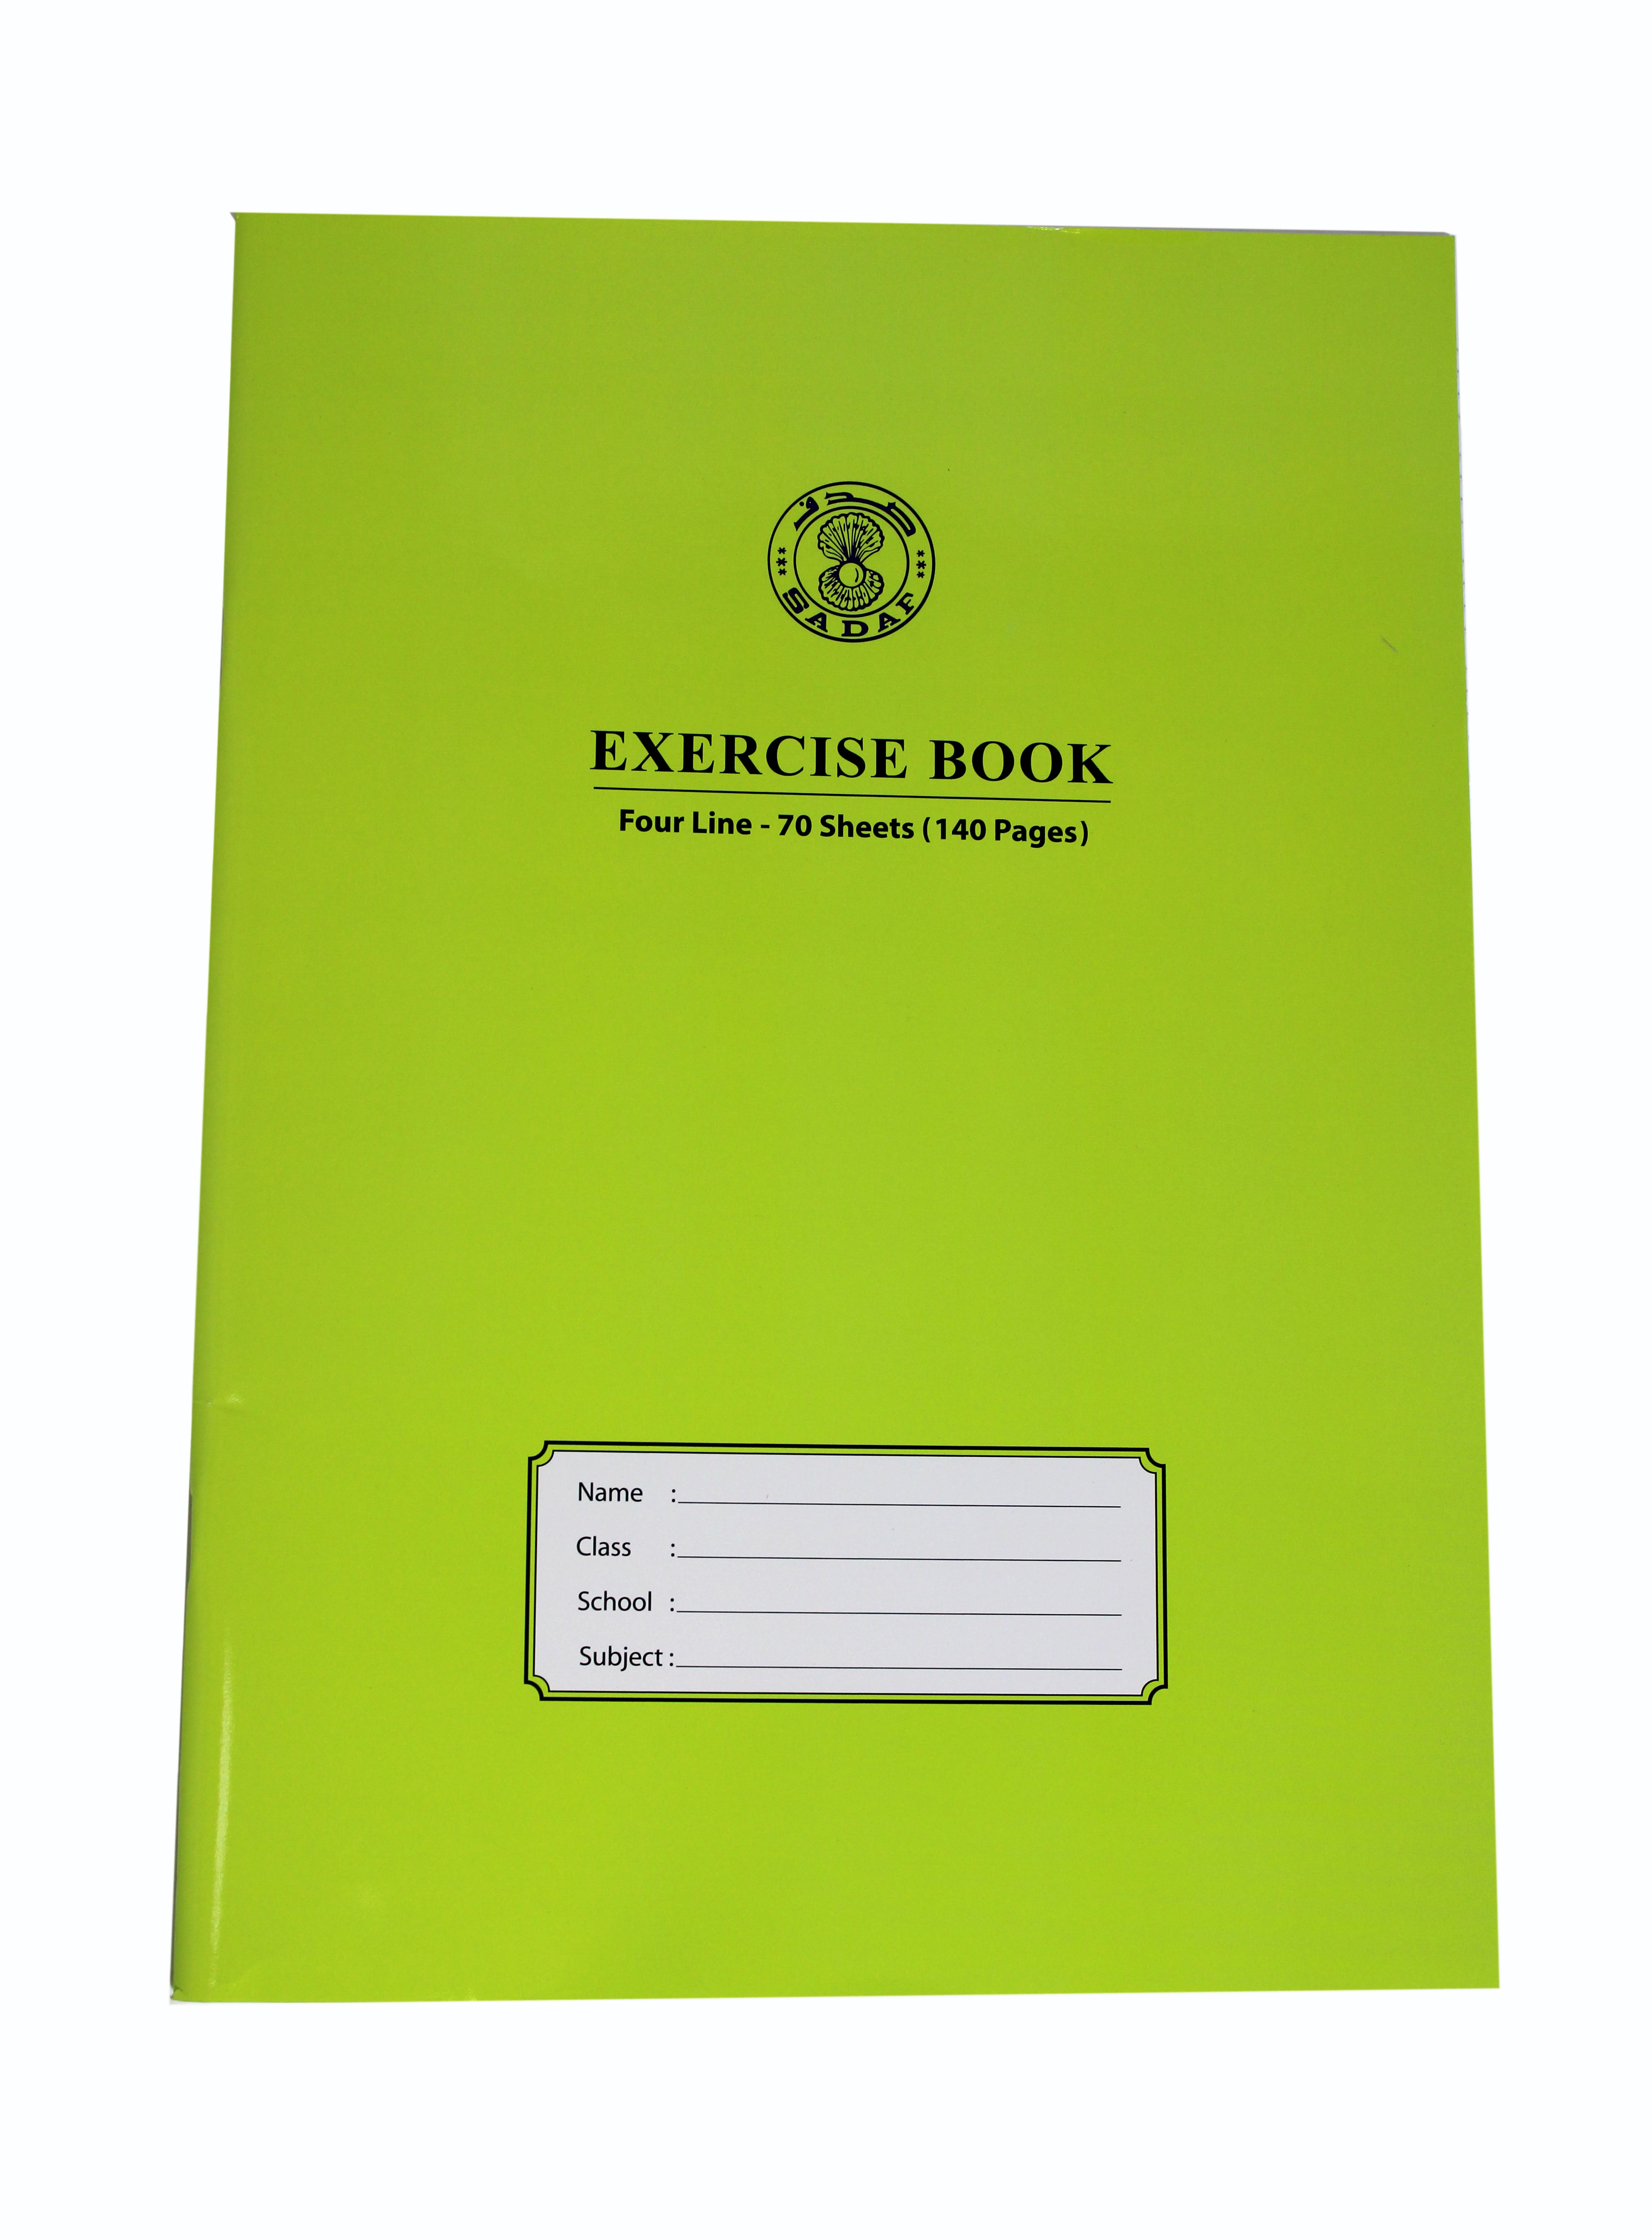 SADAF EXERCISE BOOK A4 SIZE FOUR LINE 70 SHEETS (140PAGES)